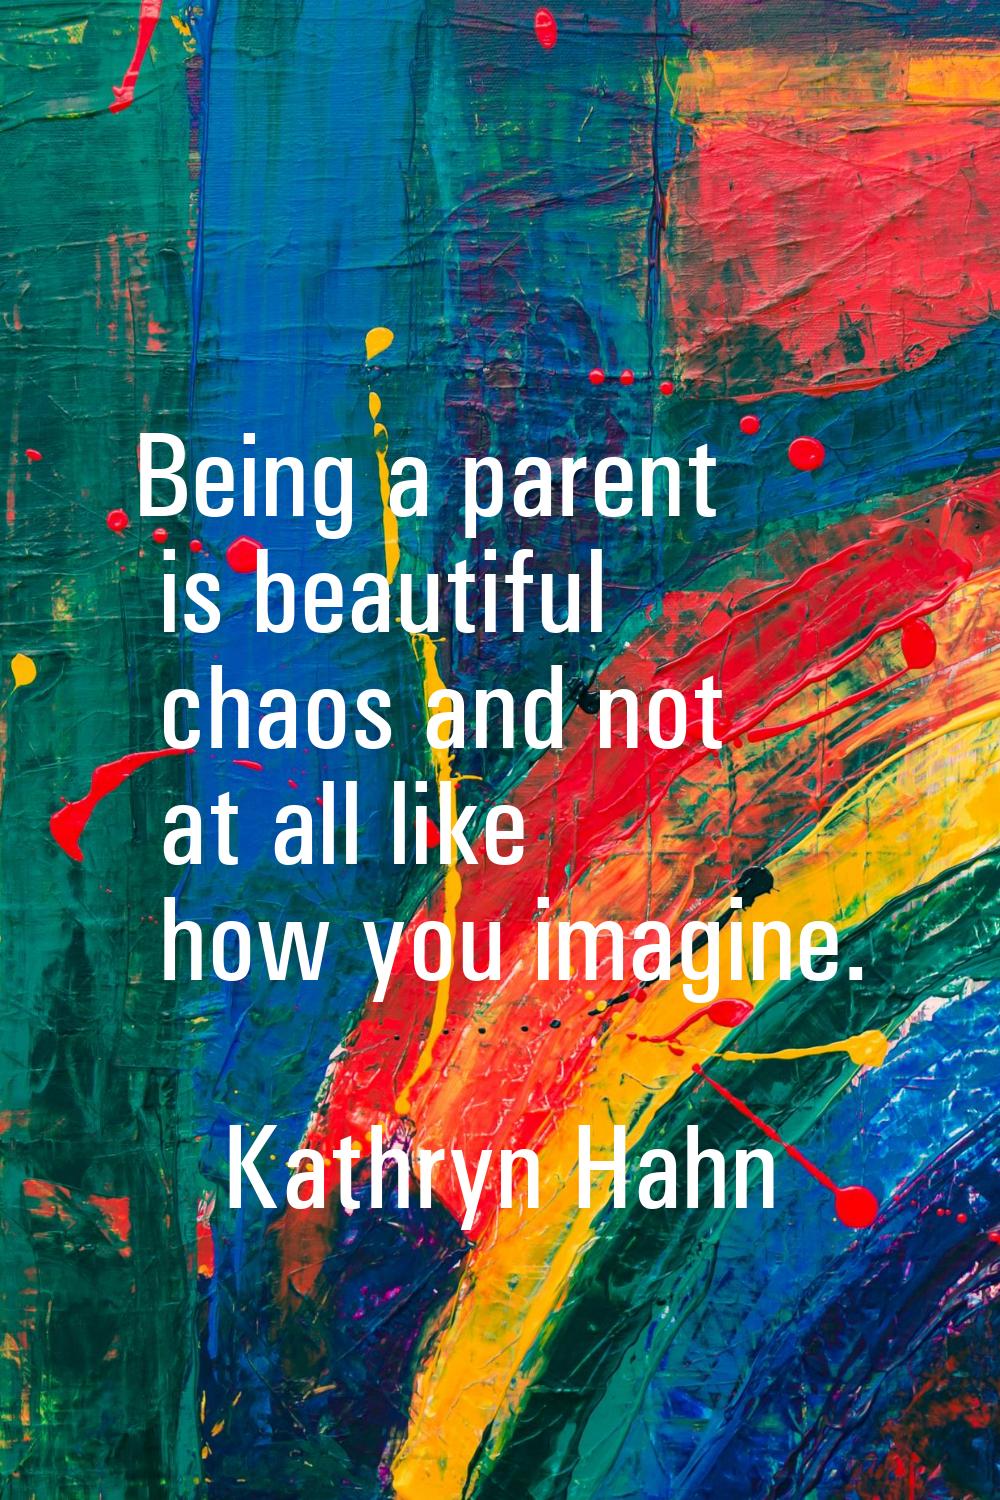 Being a parent is beautiful chaos and not at all like how you imagine.